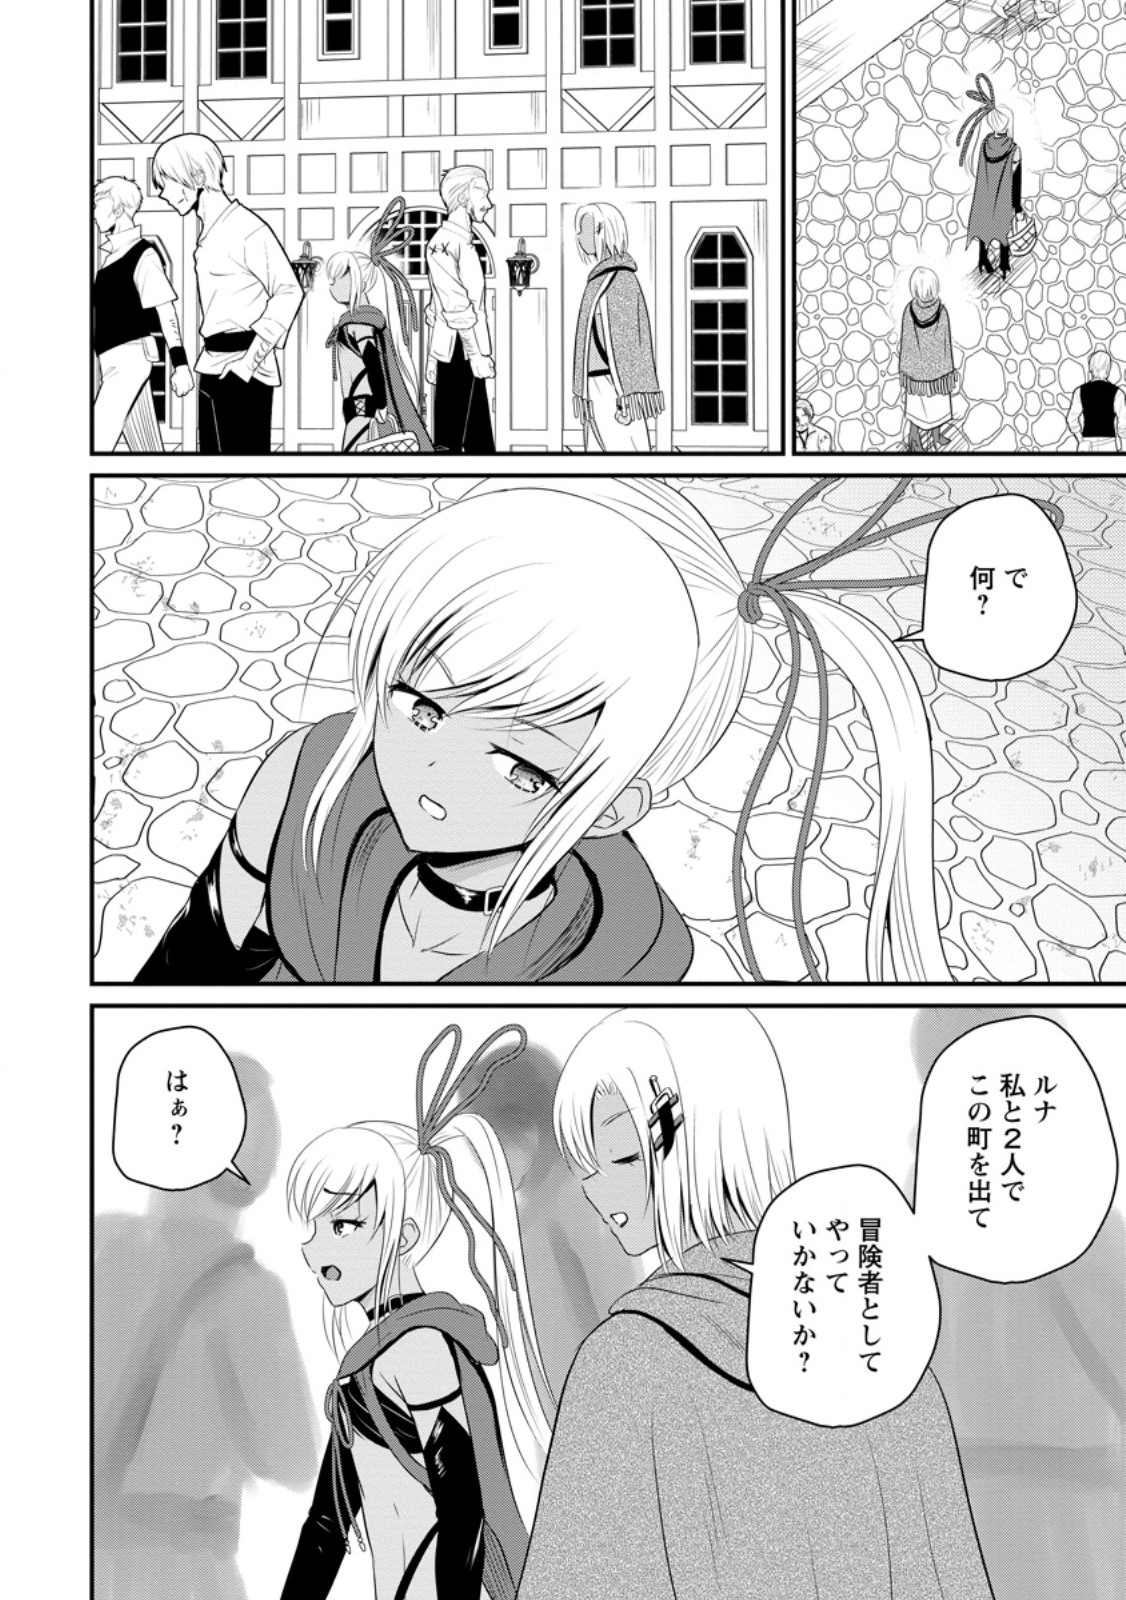 The Frontier Life of The Low-Class Ossan Healer And The Lovery Girl - Chapter 45.1 - Page 10